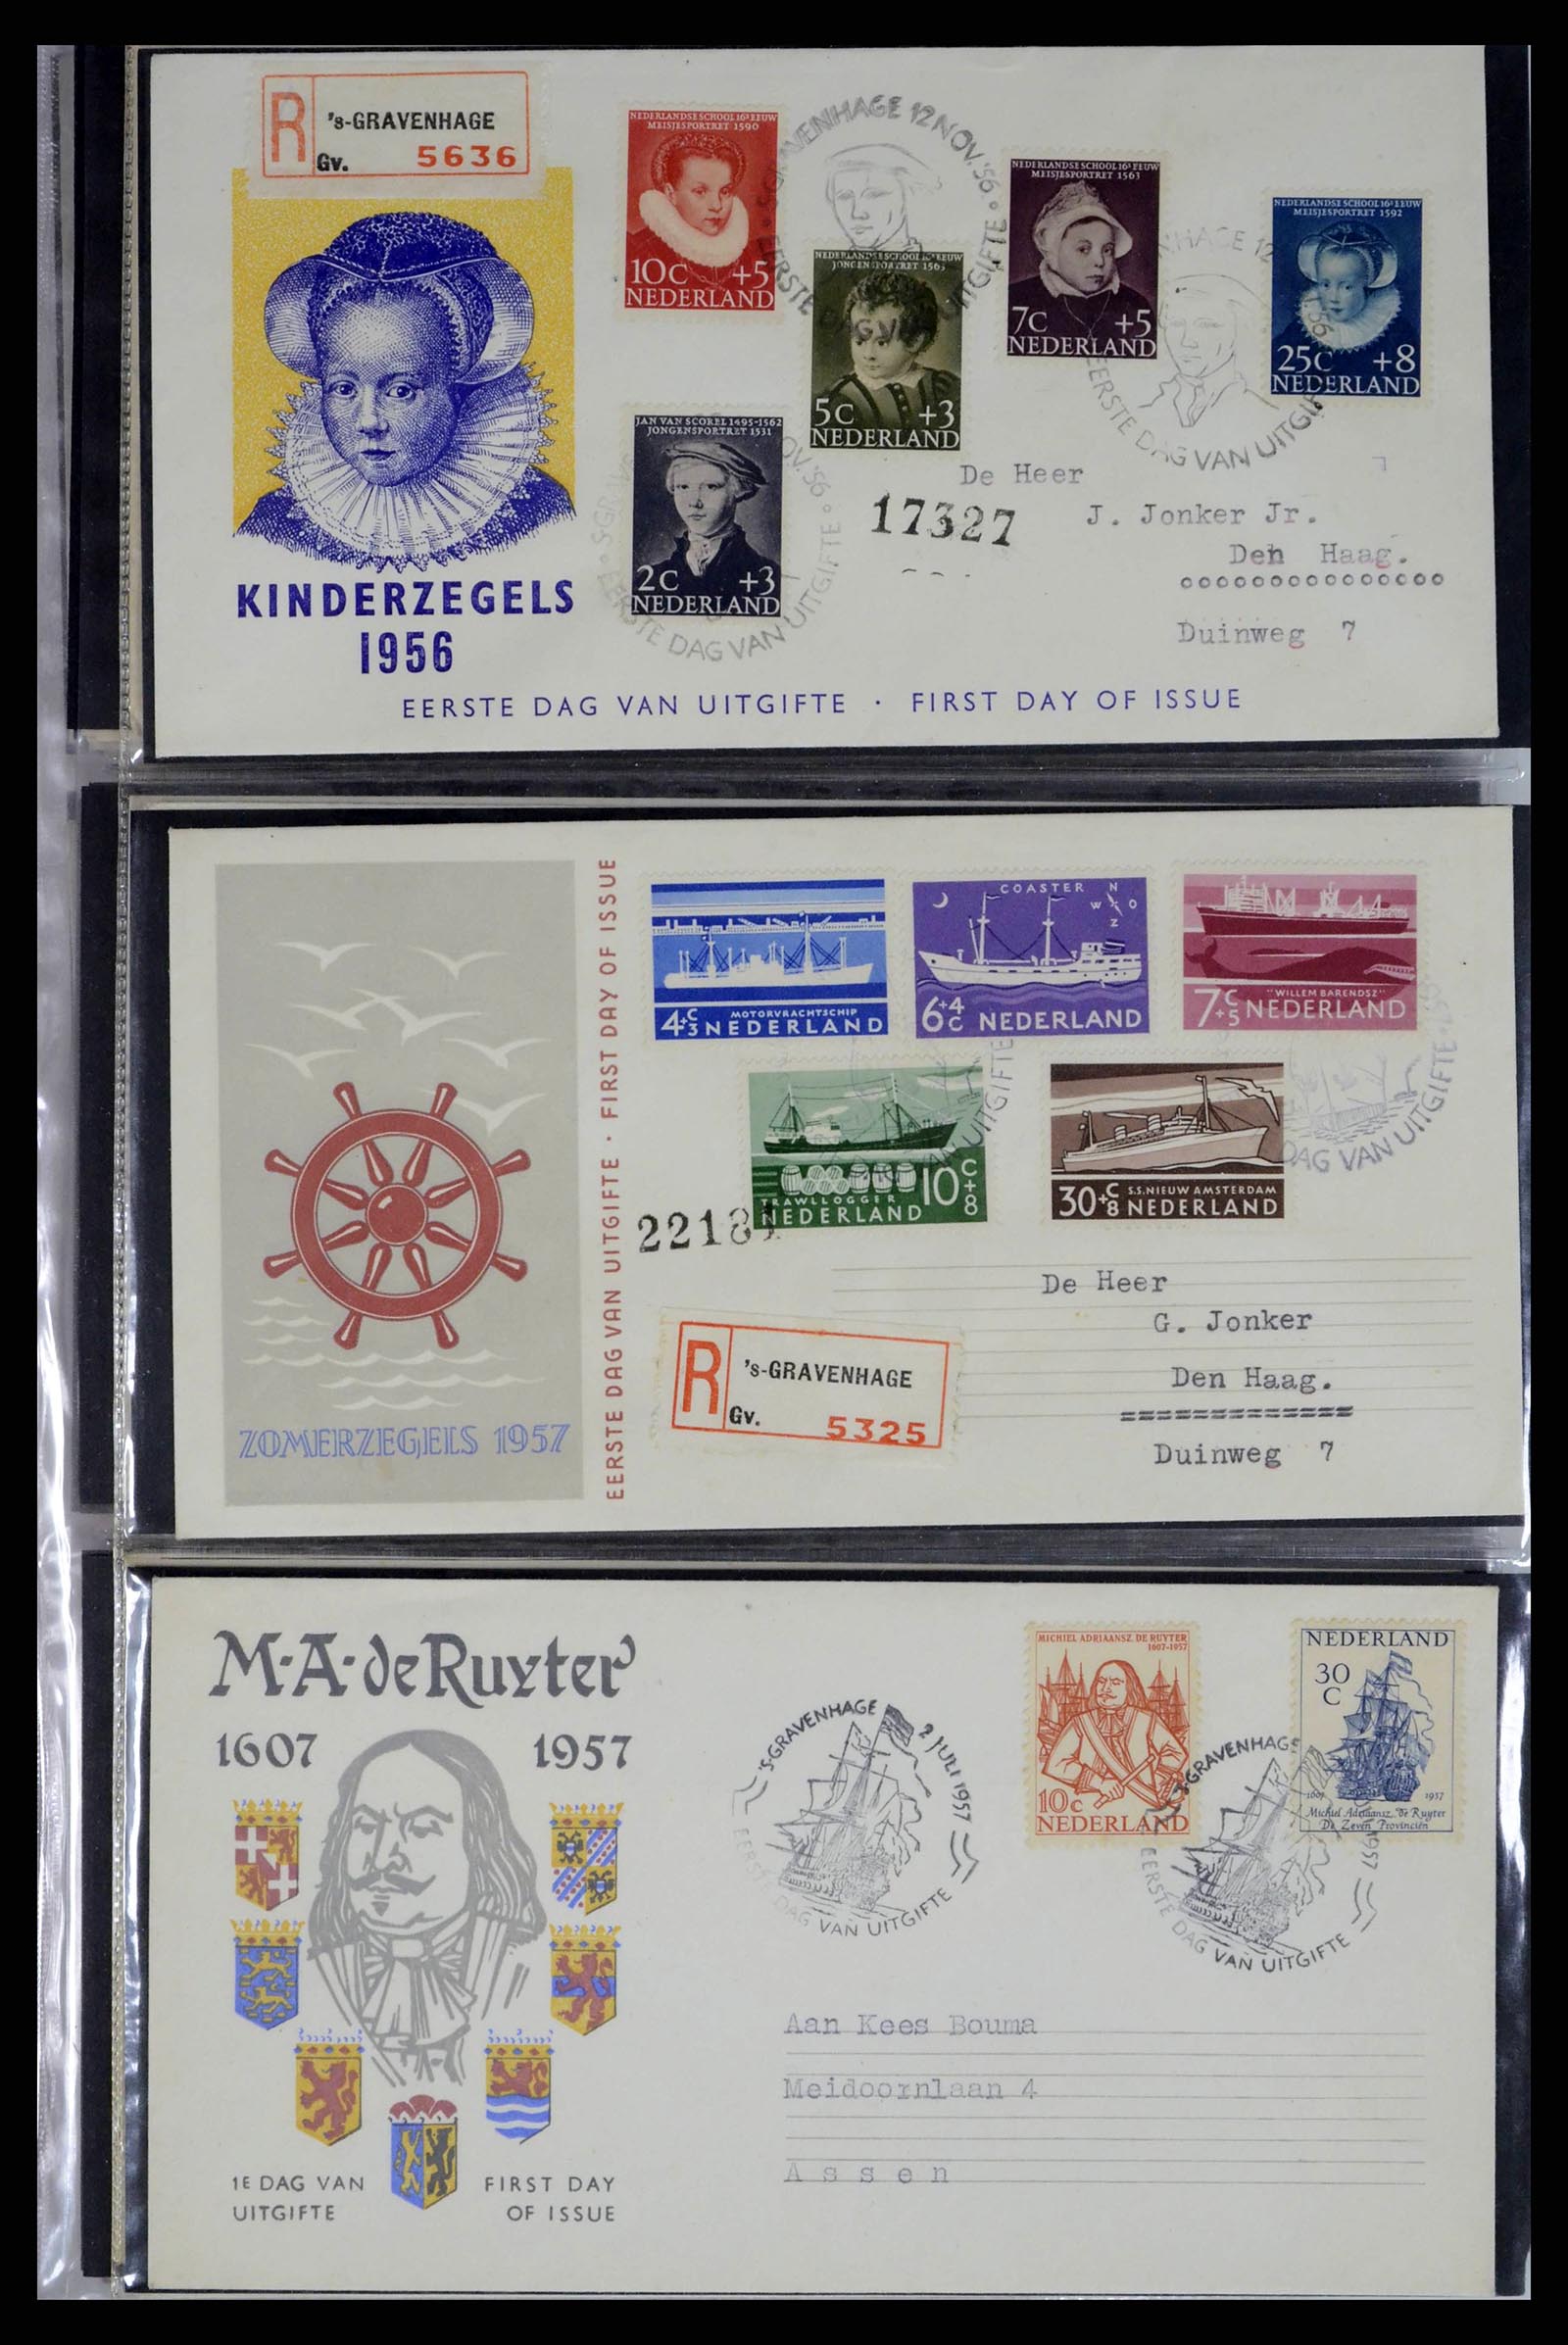 38271 0010 - Stamp collection 38271 Netherlands FDC's 1950-1995.